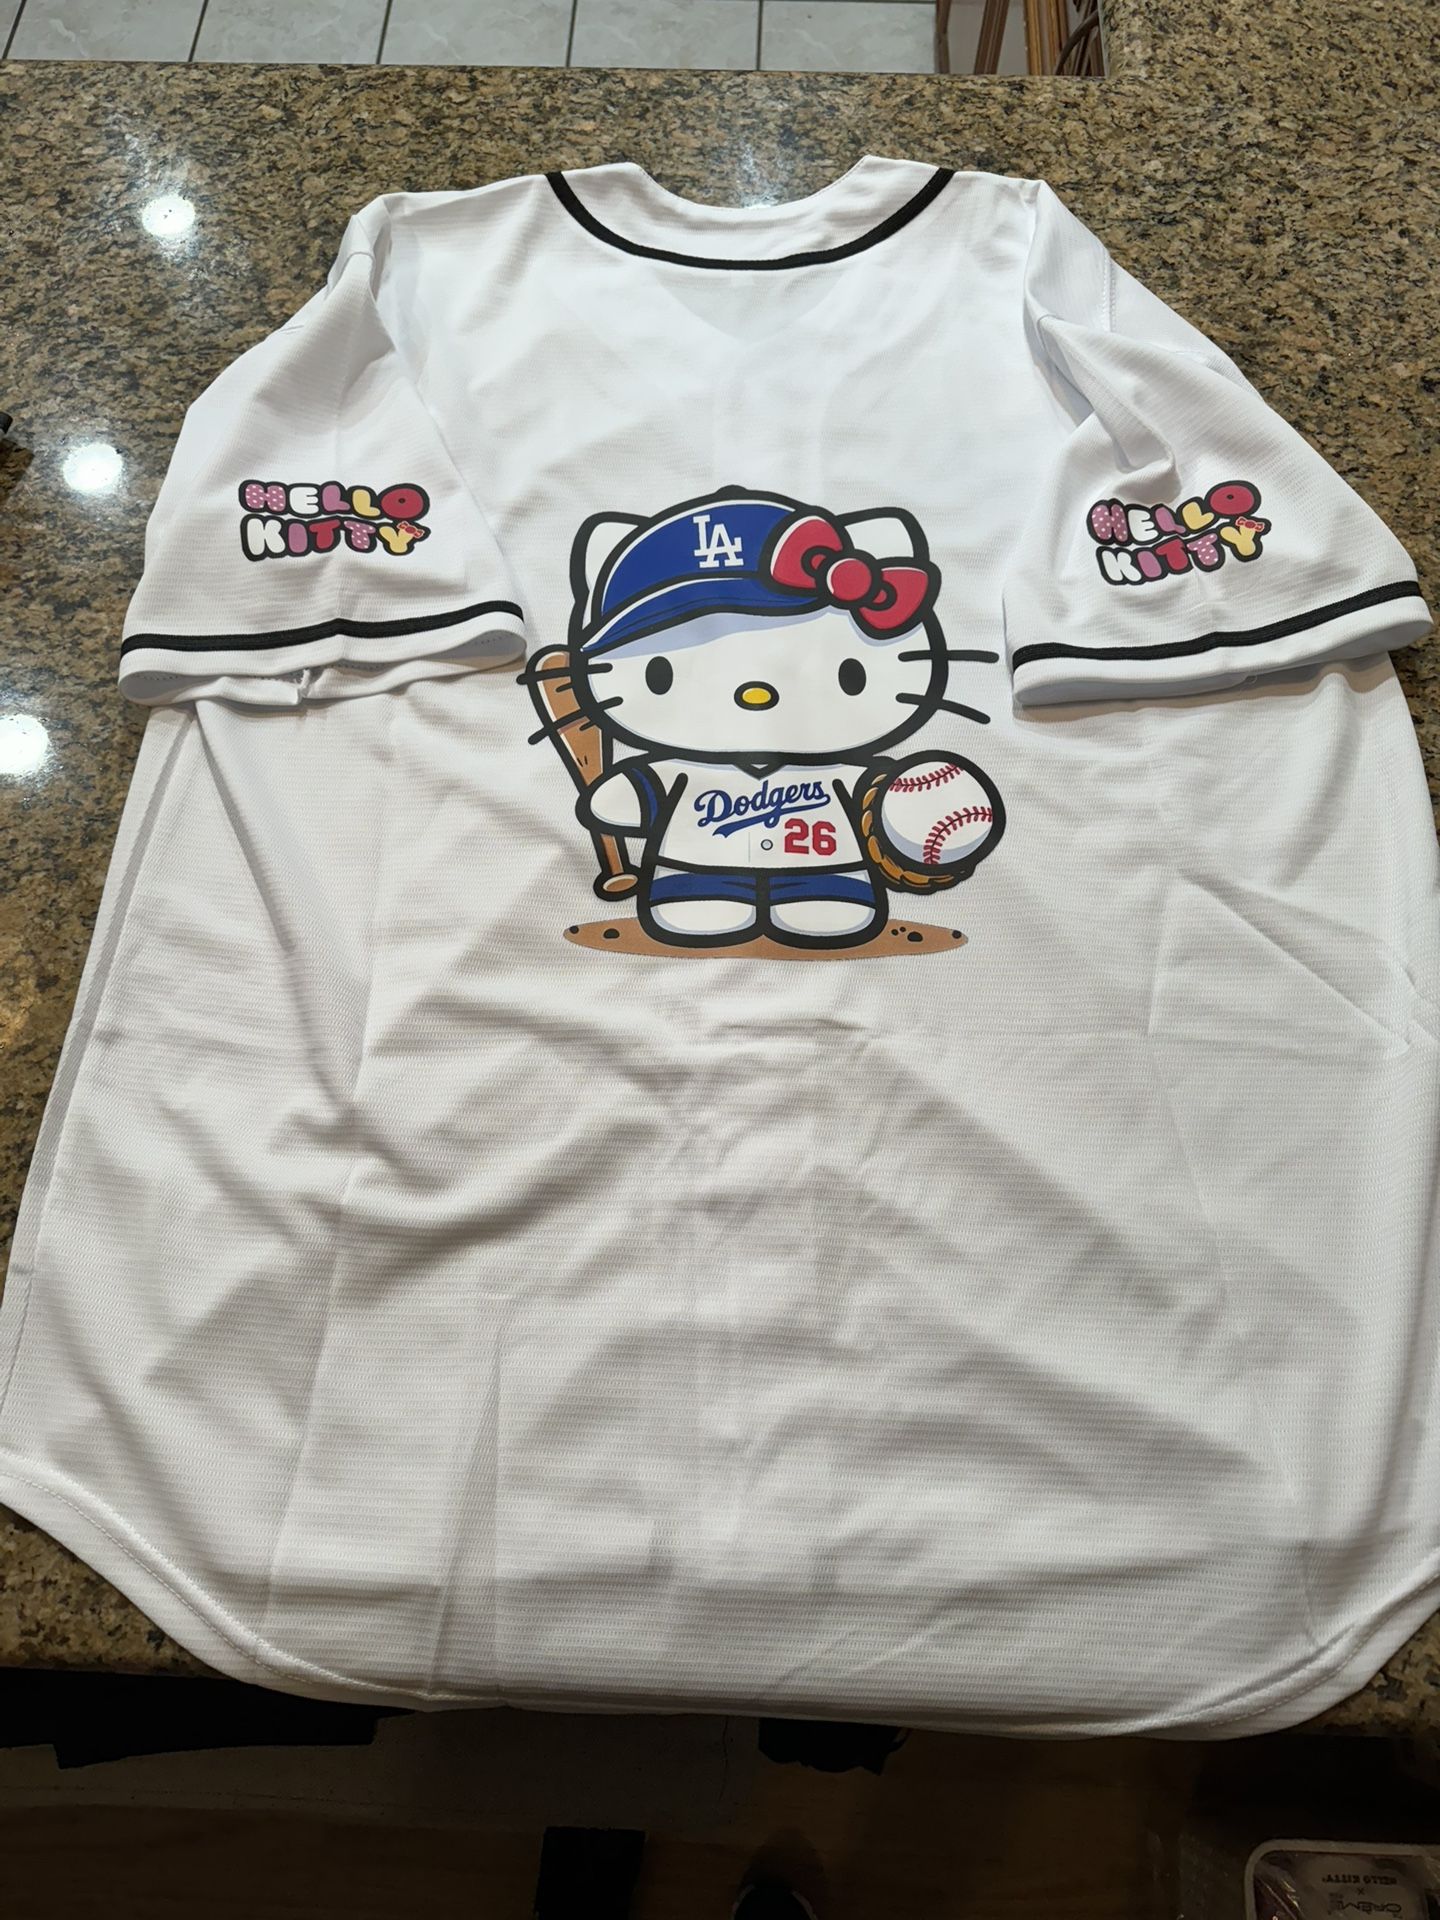 New Hello kitty Dodger inspired jersey 